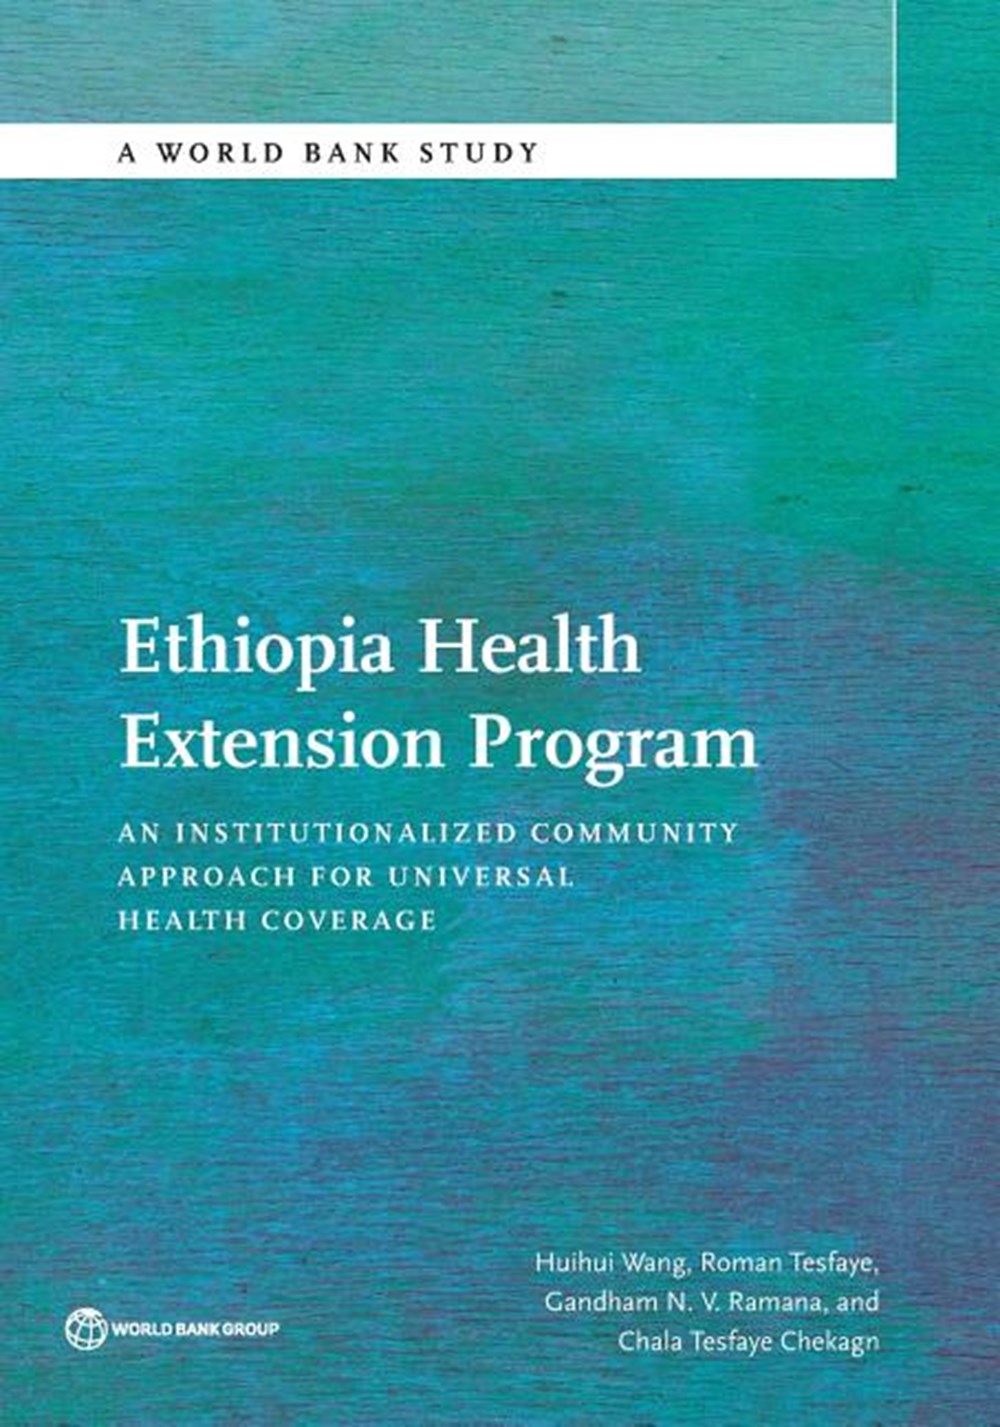 Ethiopia Health Extension Program: An Institutionalized Community Approach for Universal Health Cove